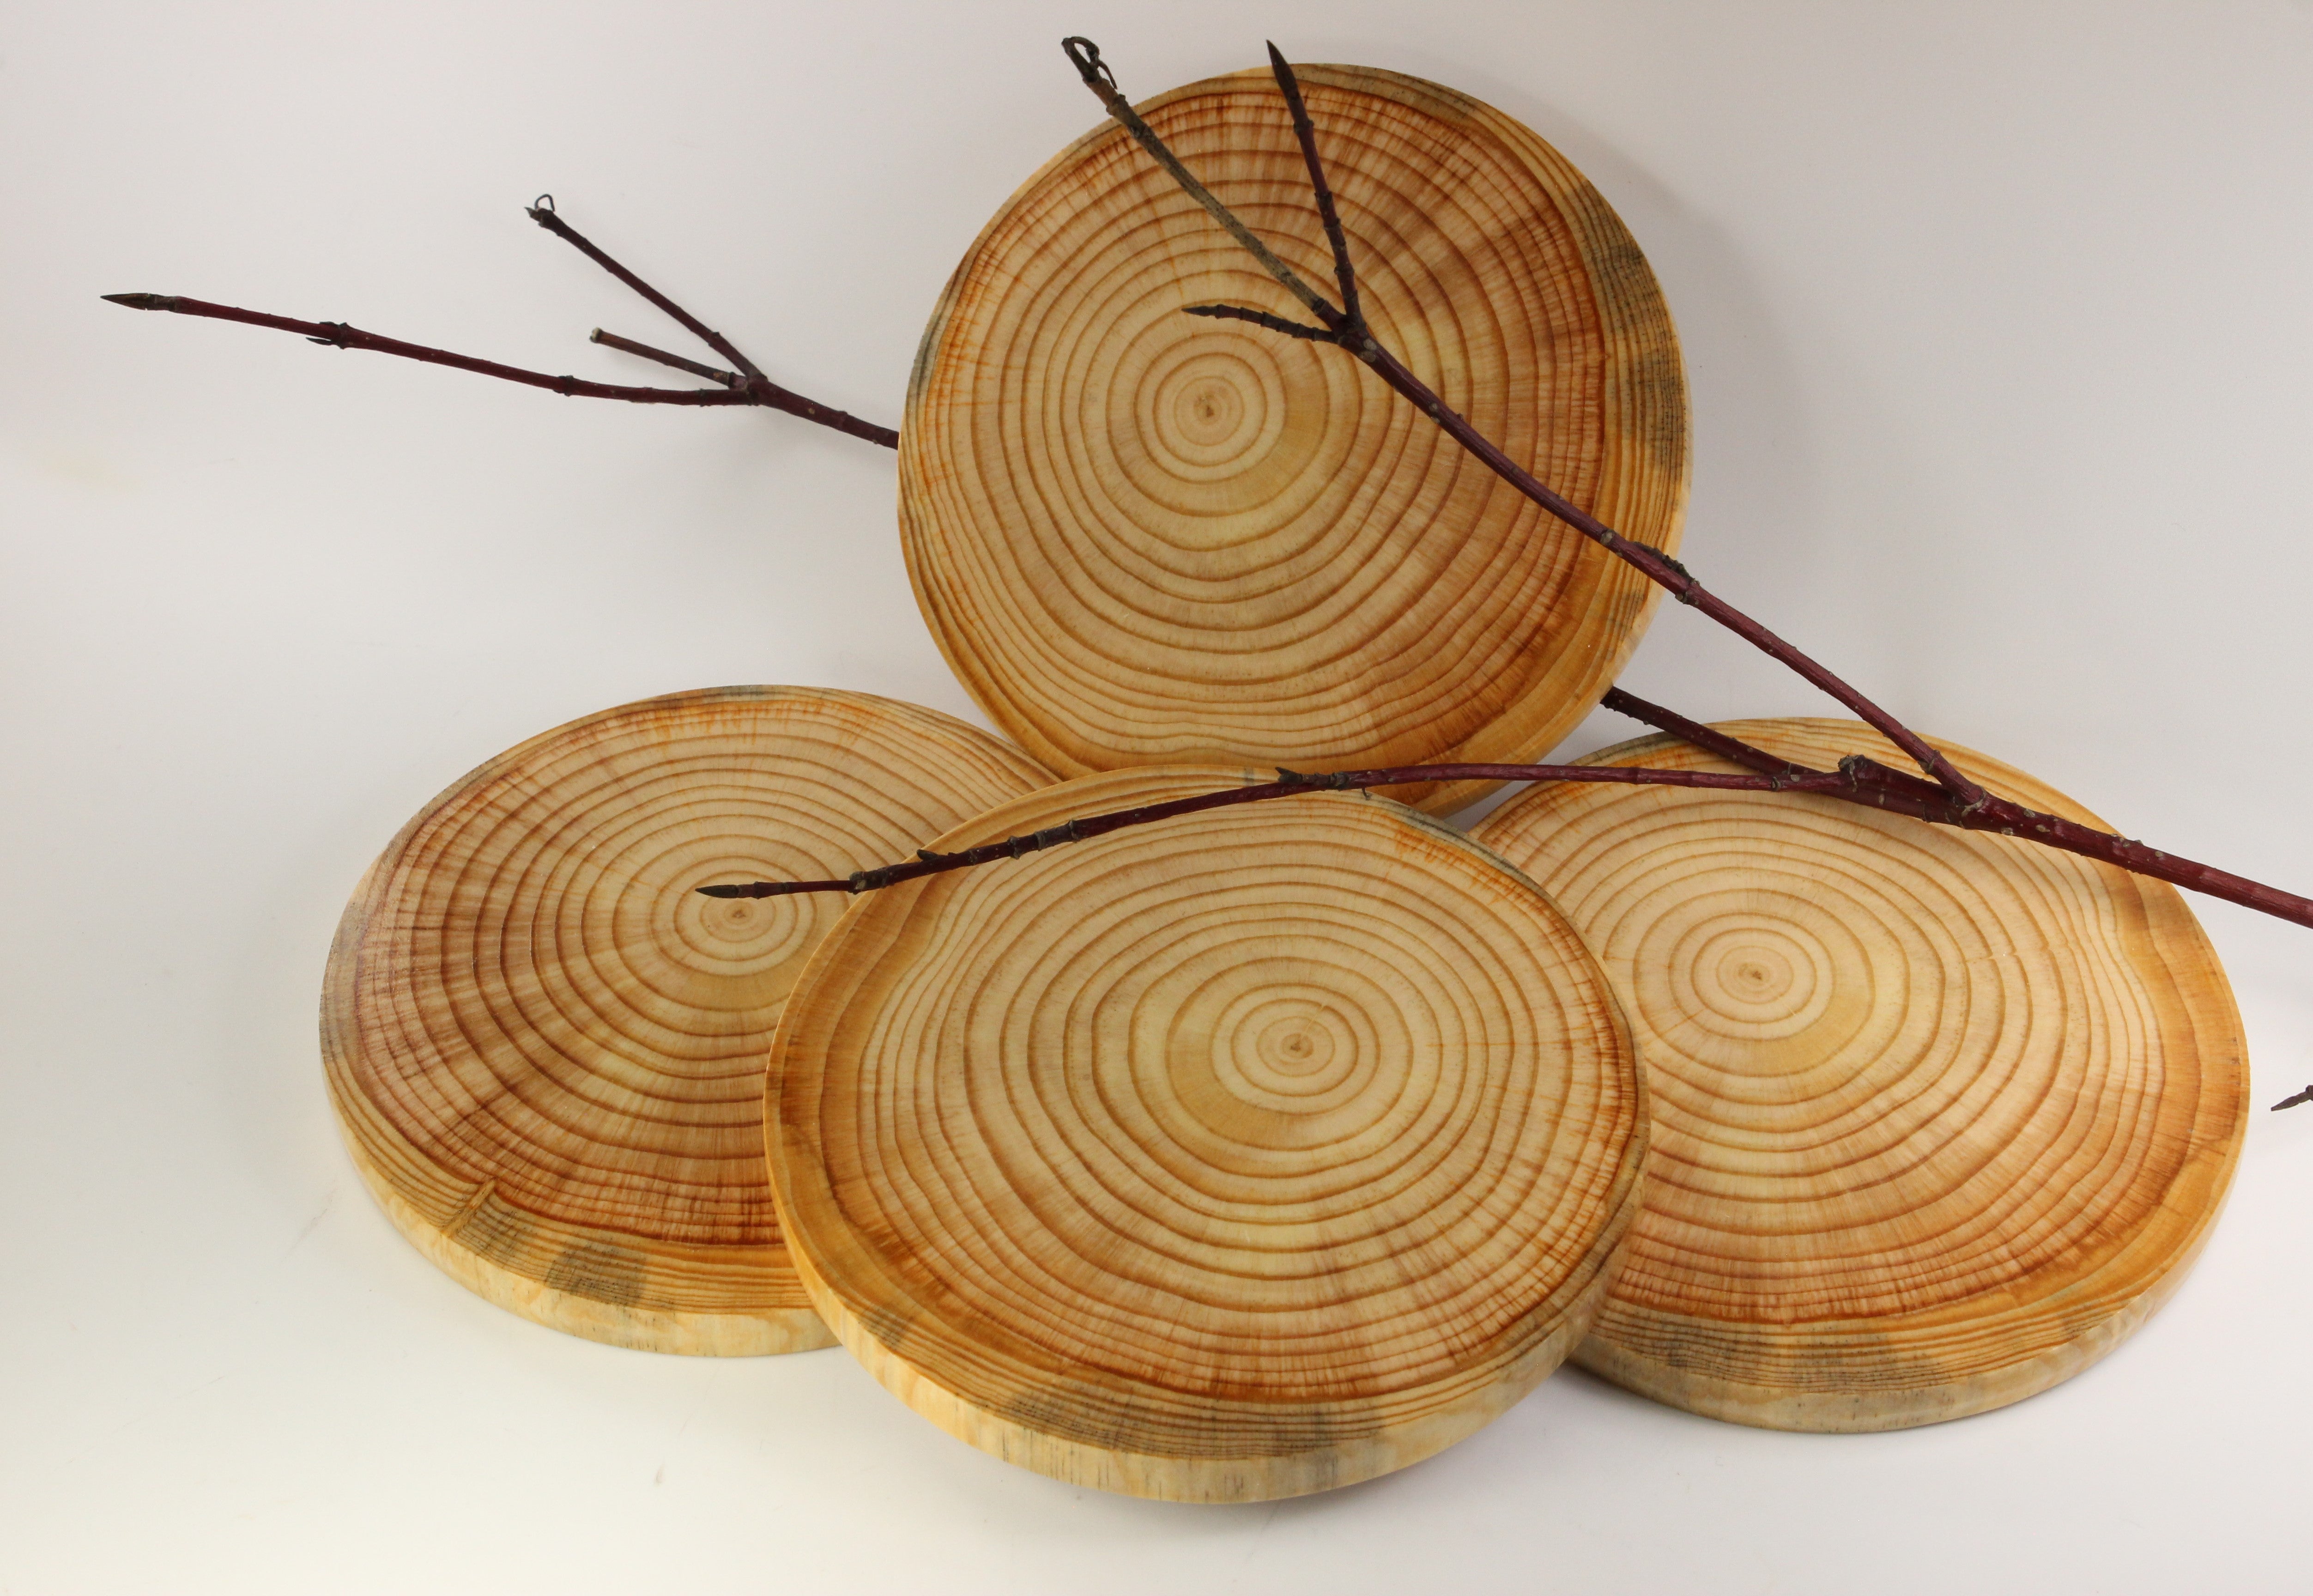 Deluxe Cypress Coasters